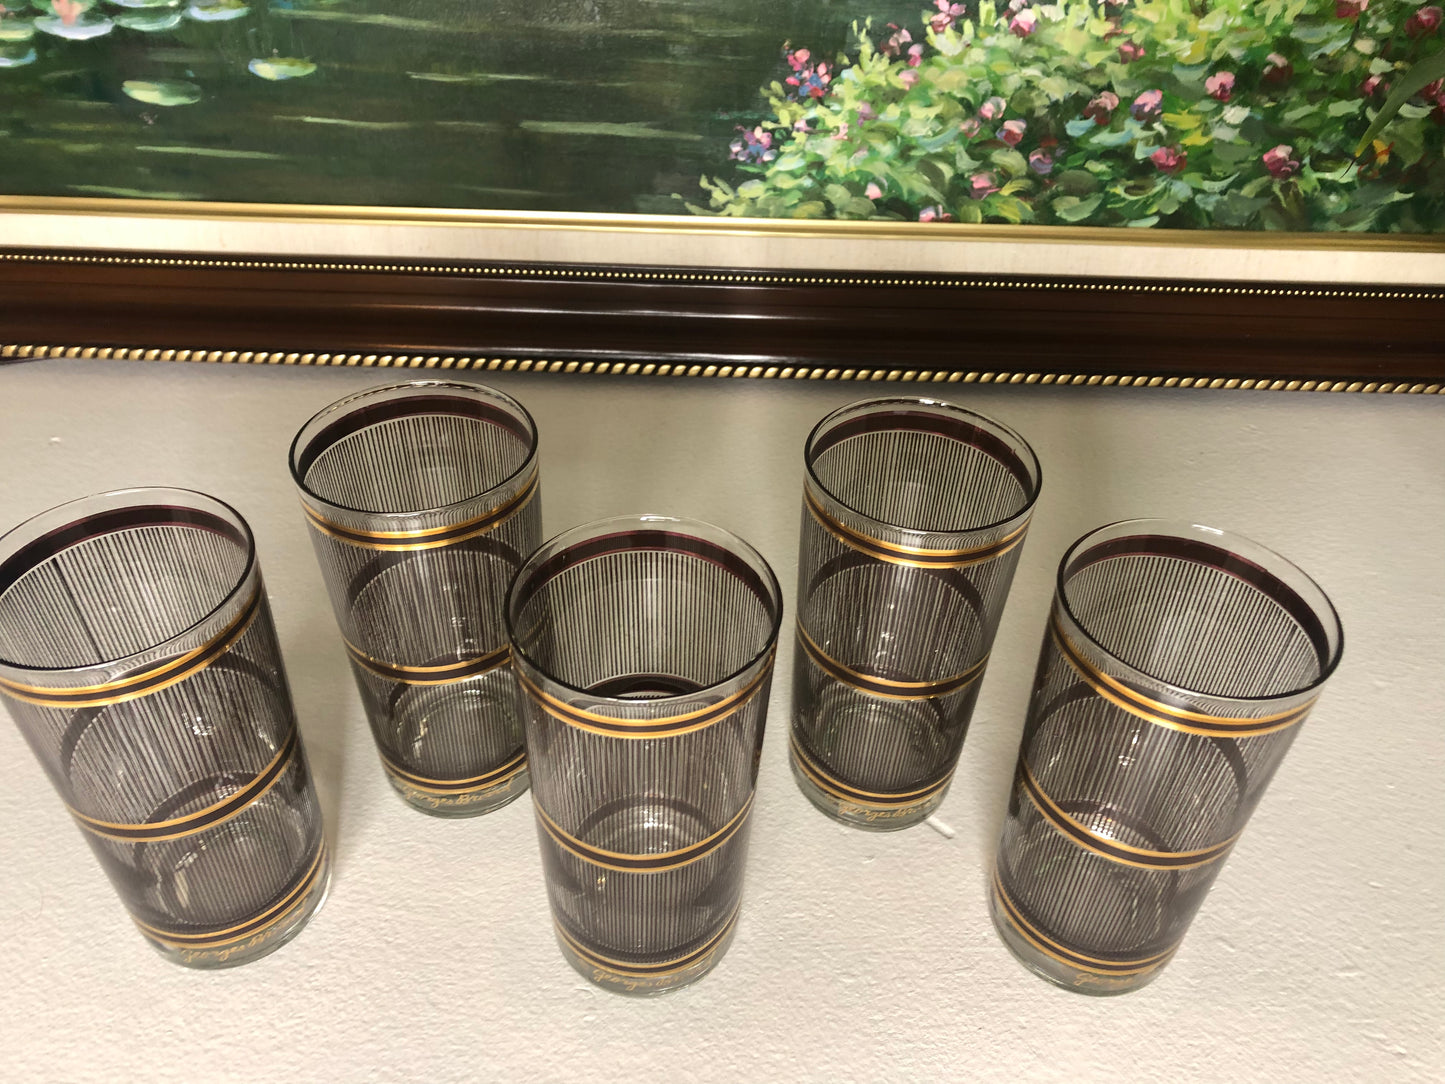 Stunning Signed Georges Briard Black and Gold Highballs Set of 5 - Excellent Condition!